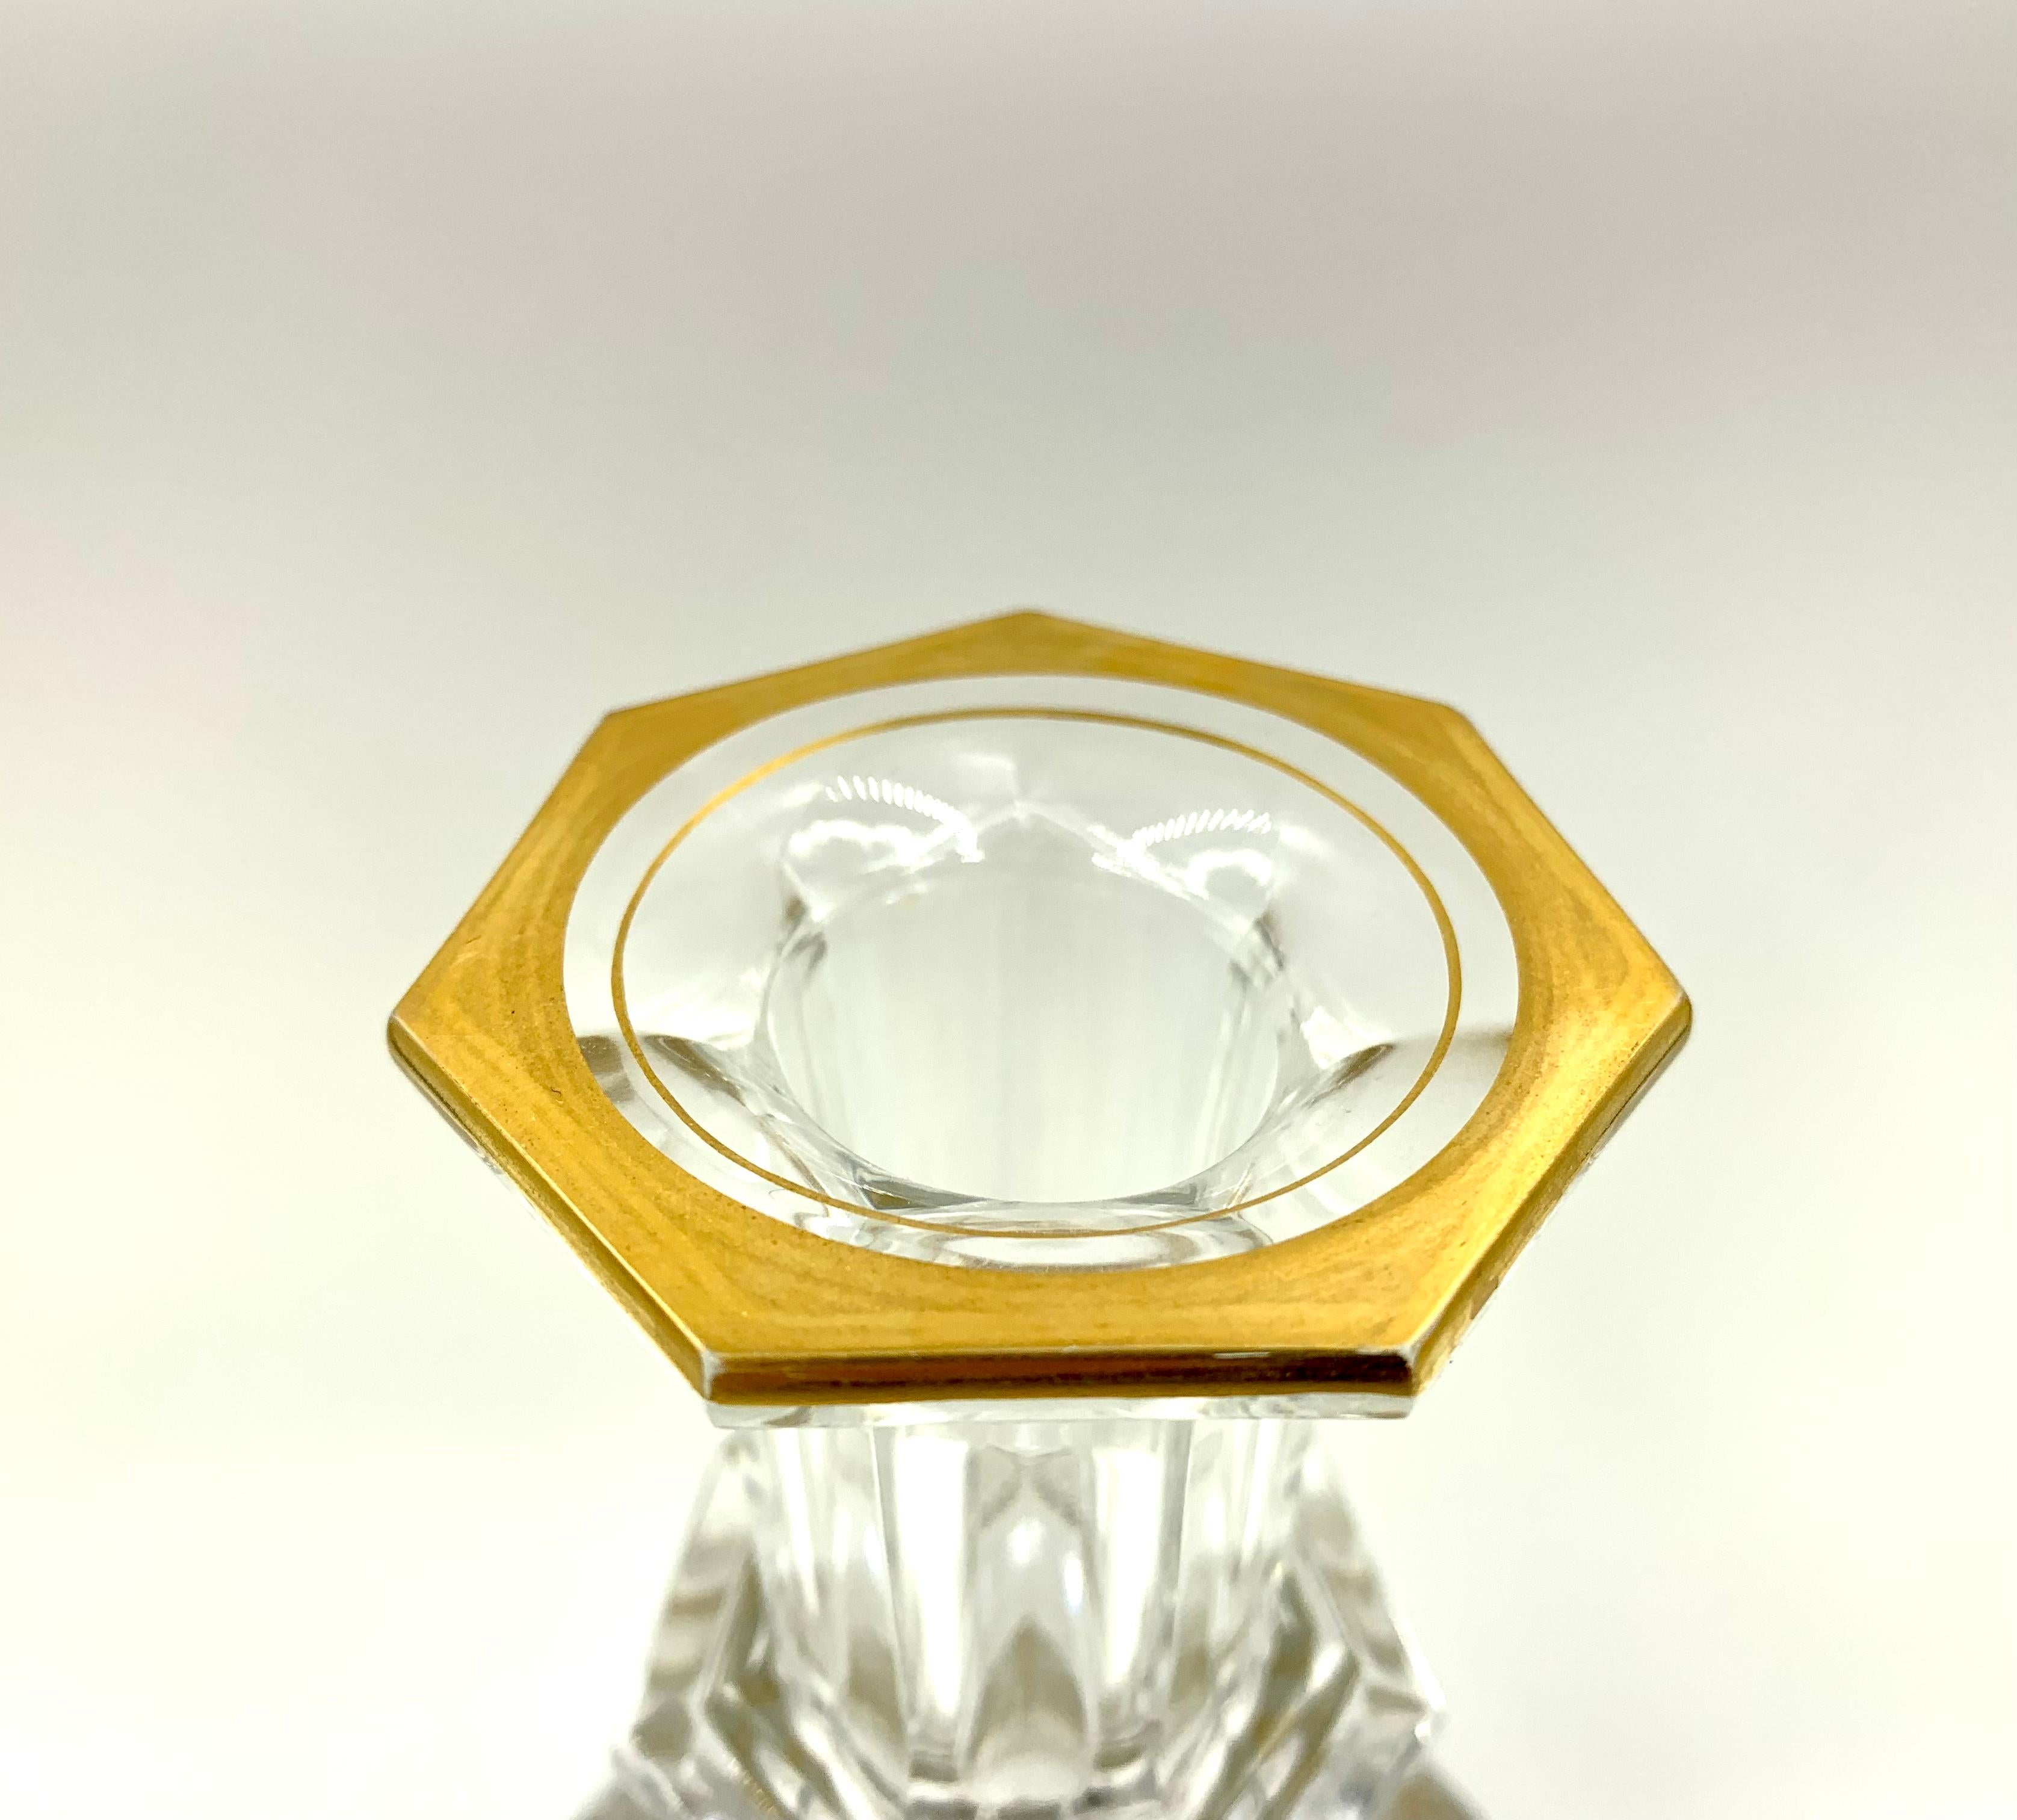 Estate Baccarat Harcourt Empire 1841 decanter.
Iconic Baccarat design, the most sought after and the earliest in Baccarat collection, dating to 1841. Graceful gold details complement the fine geometric structure of the fine crystal. 
Very Good